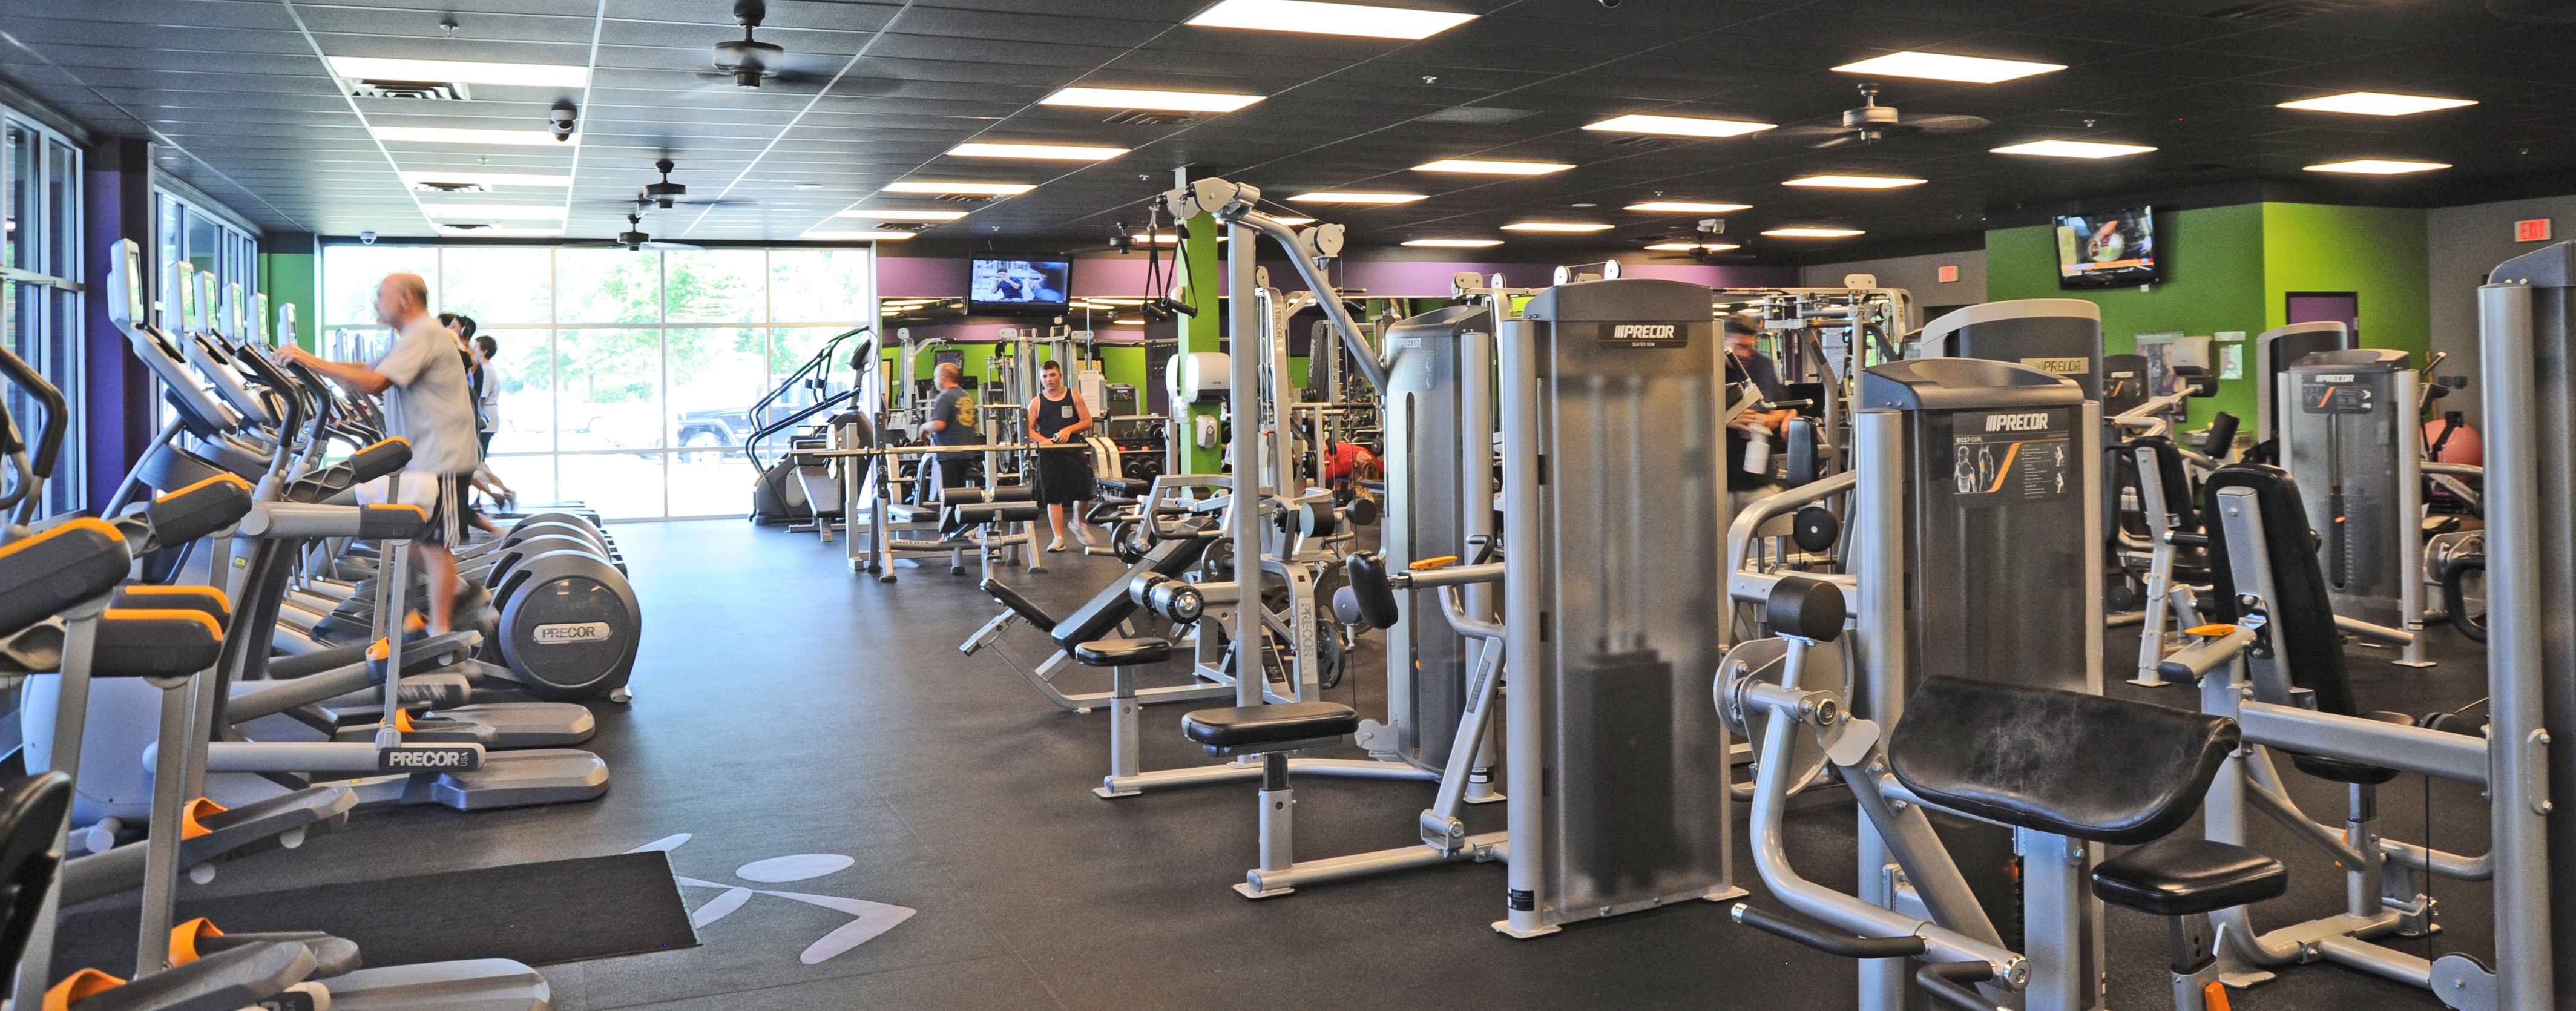 Anytime Fitness - CW Brinkley